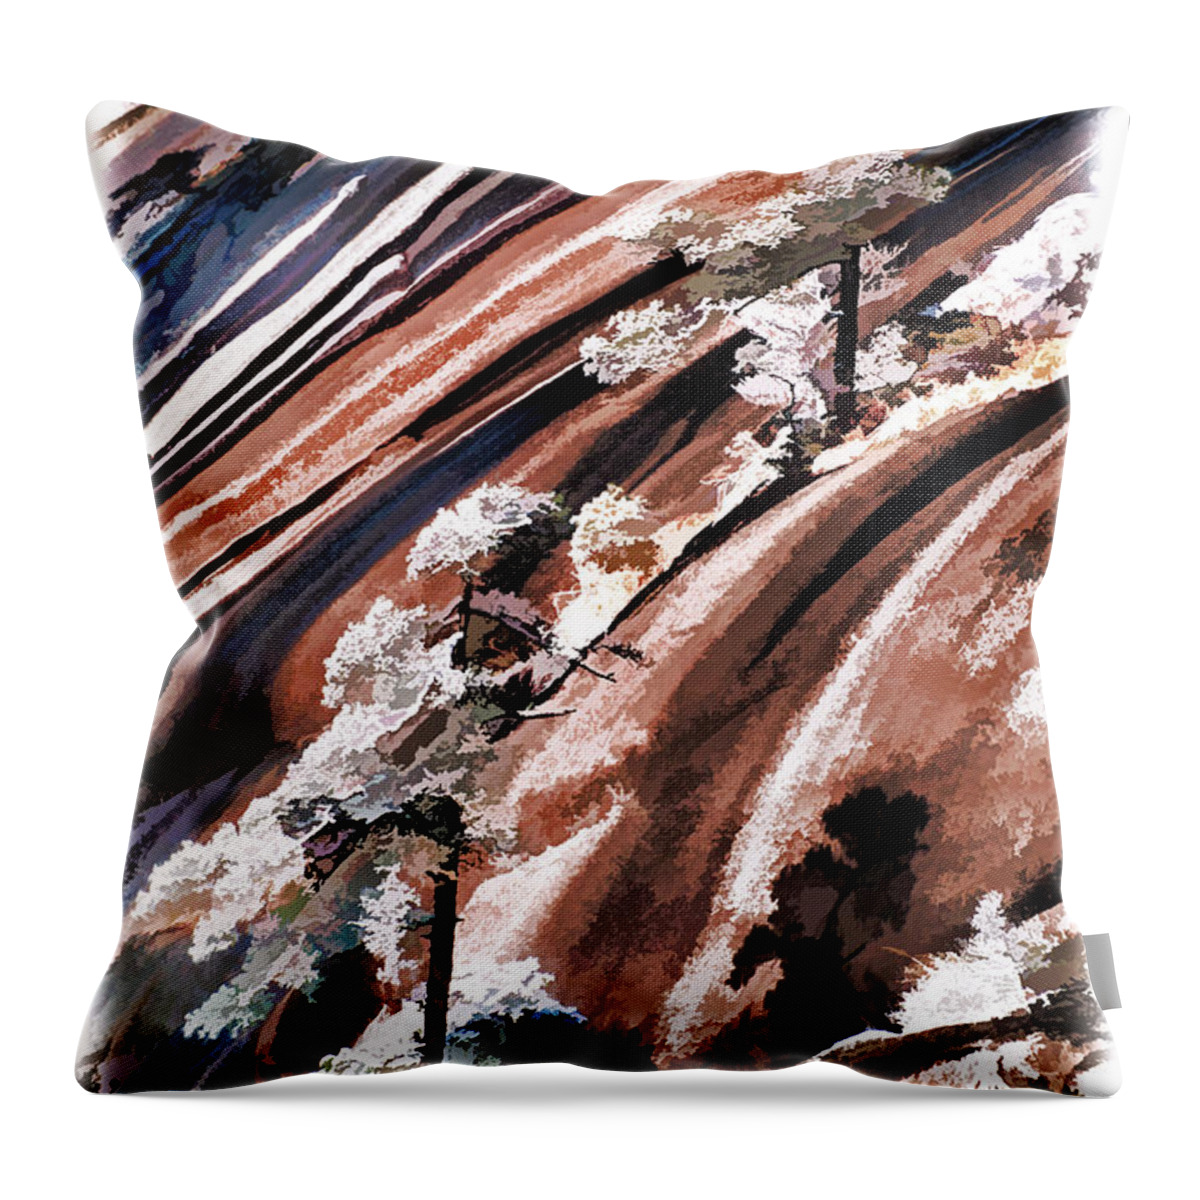 China Throw Pillow featuring the photograph Winter Pines by Dennis Cox